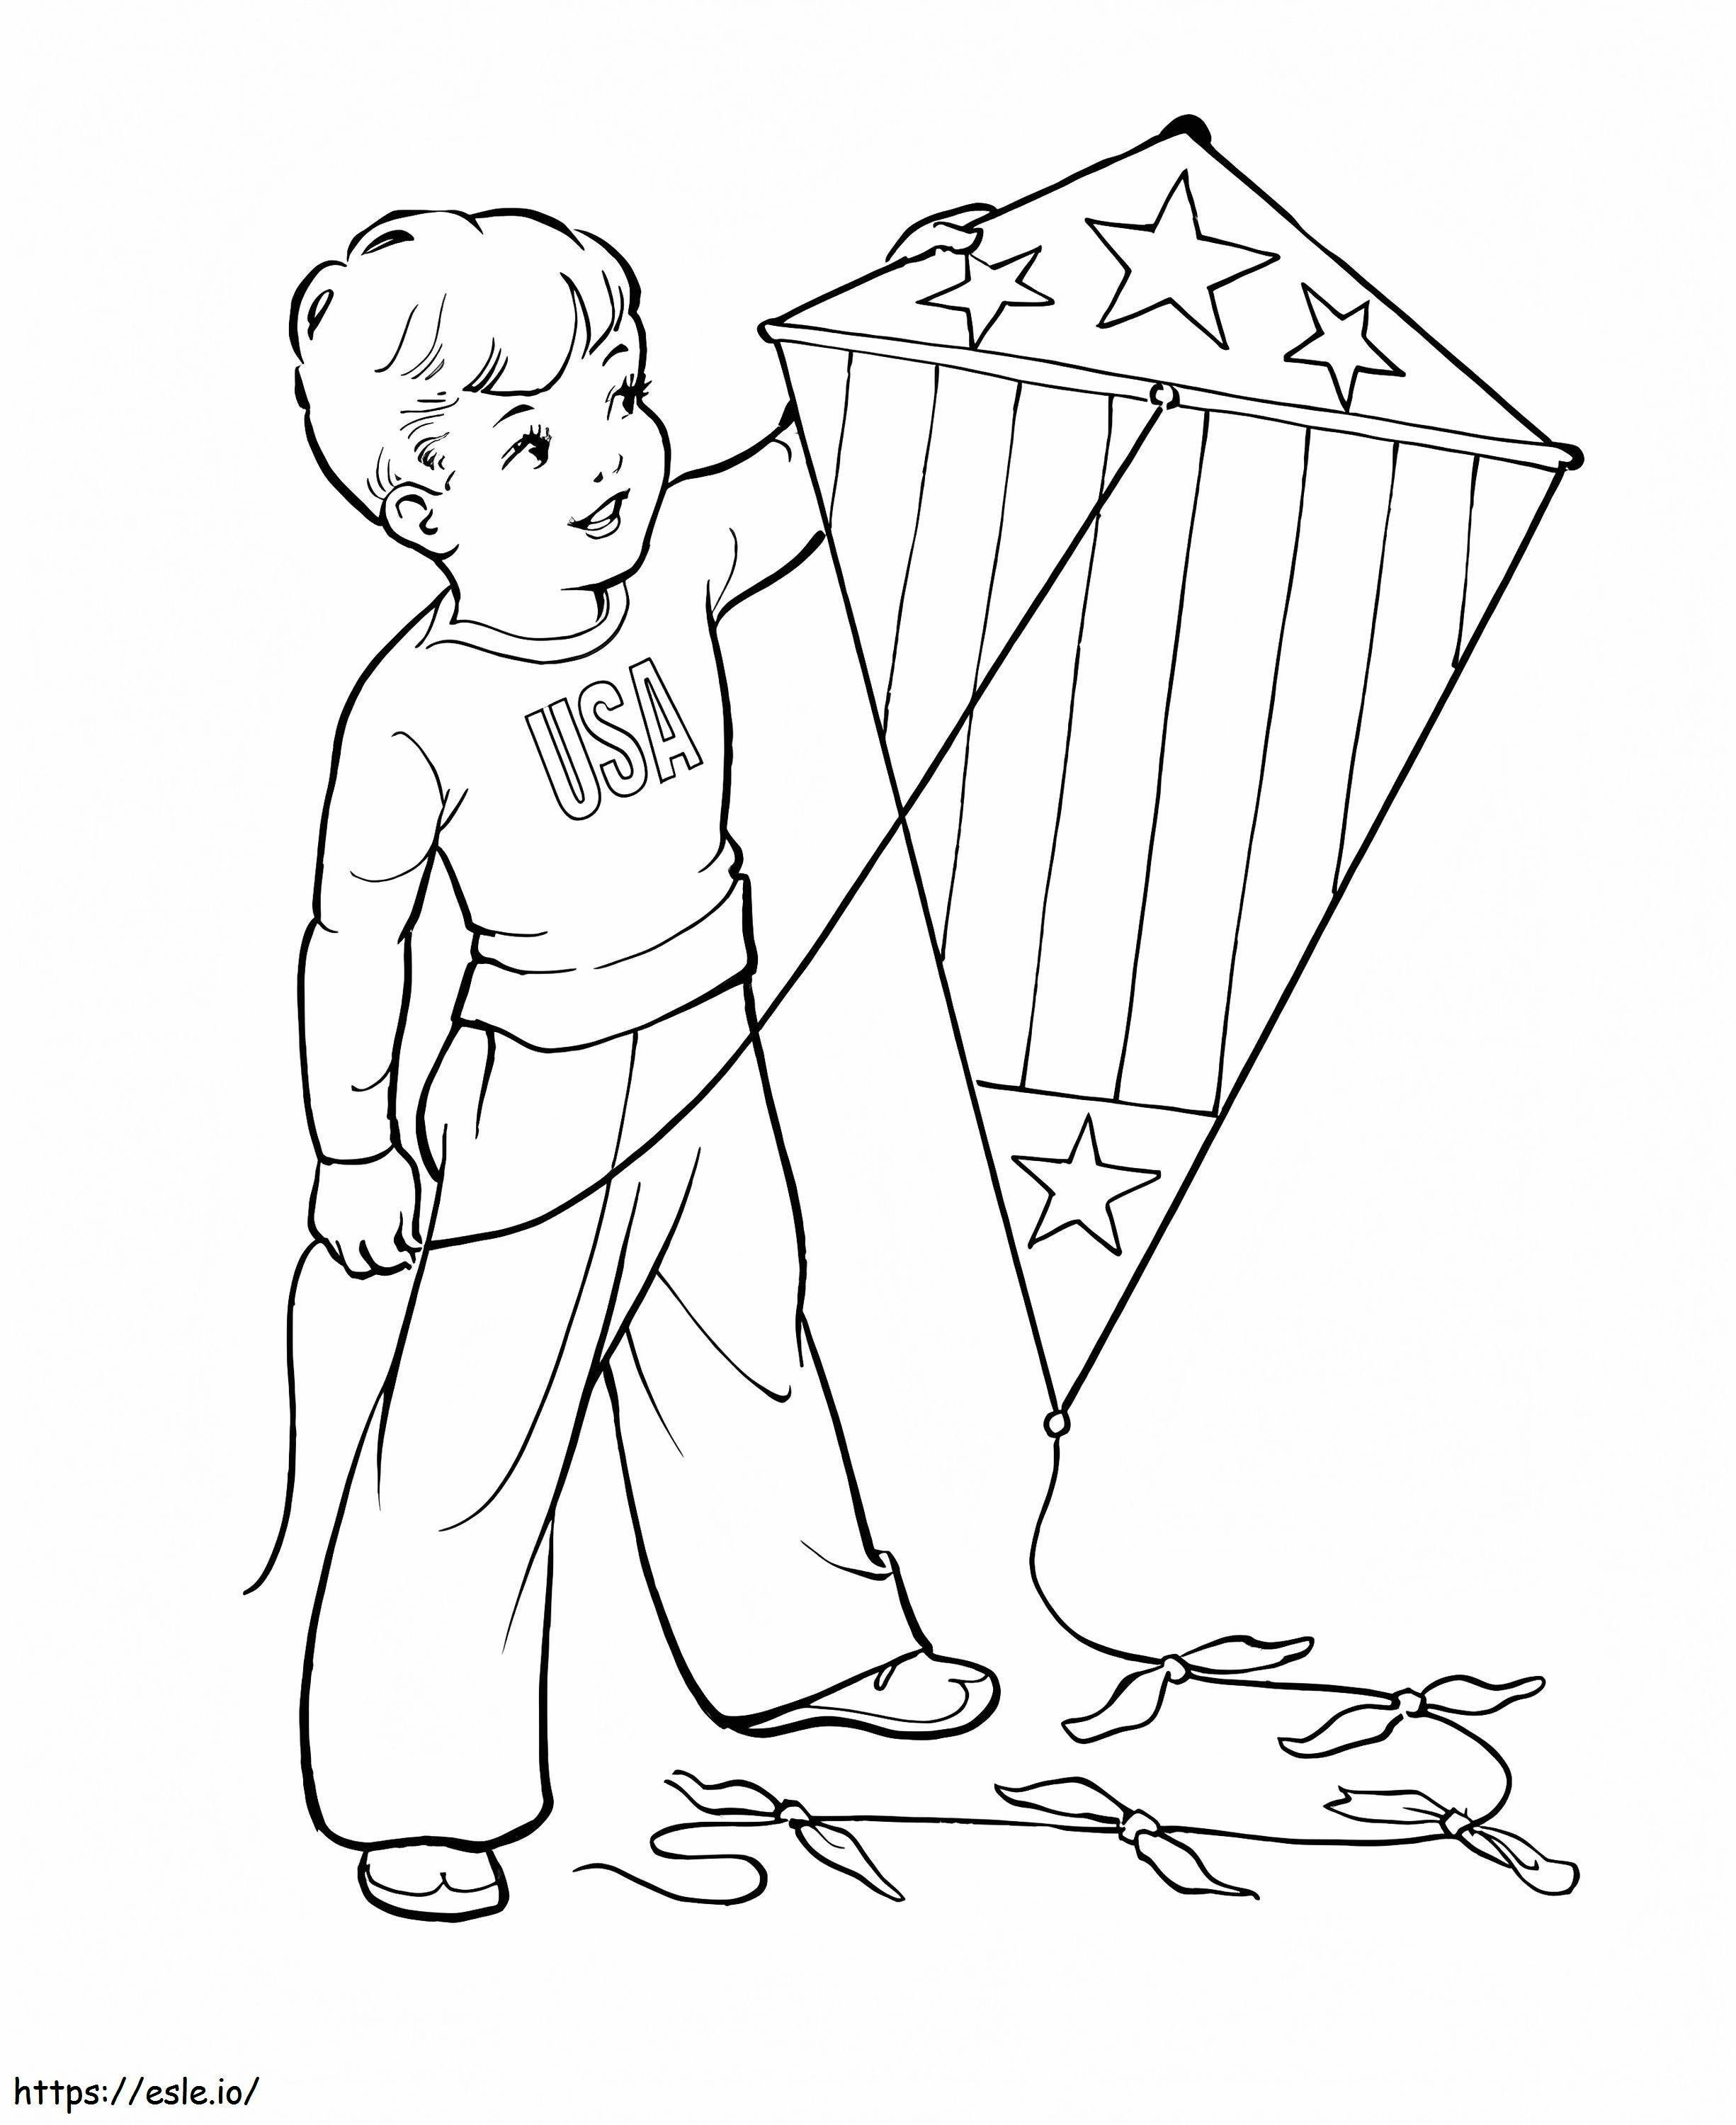 Boy With A Kite coloring page